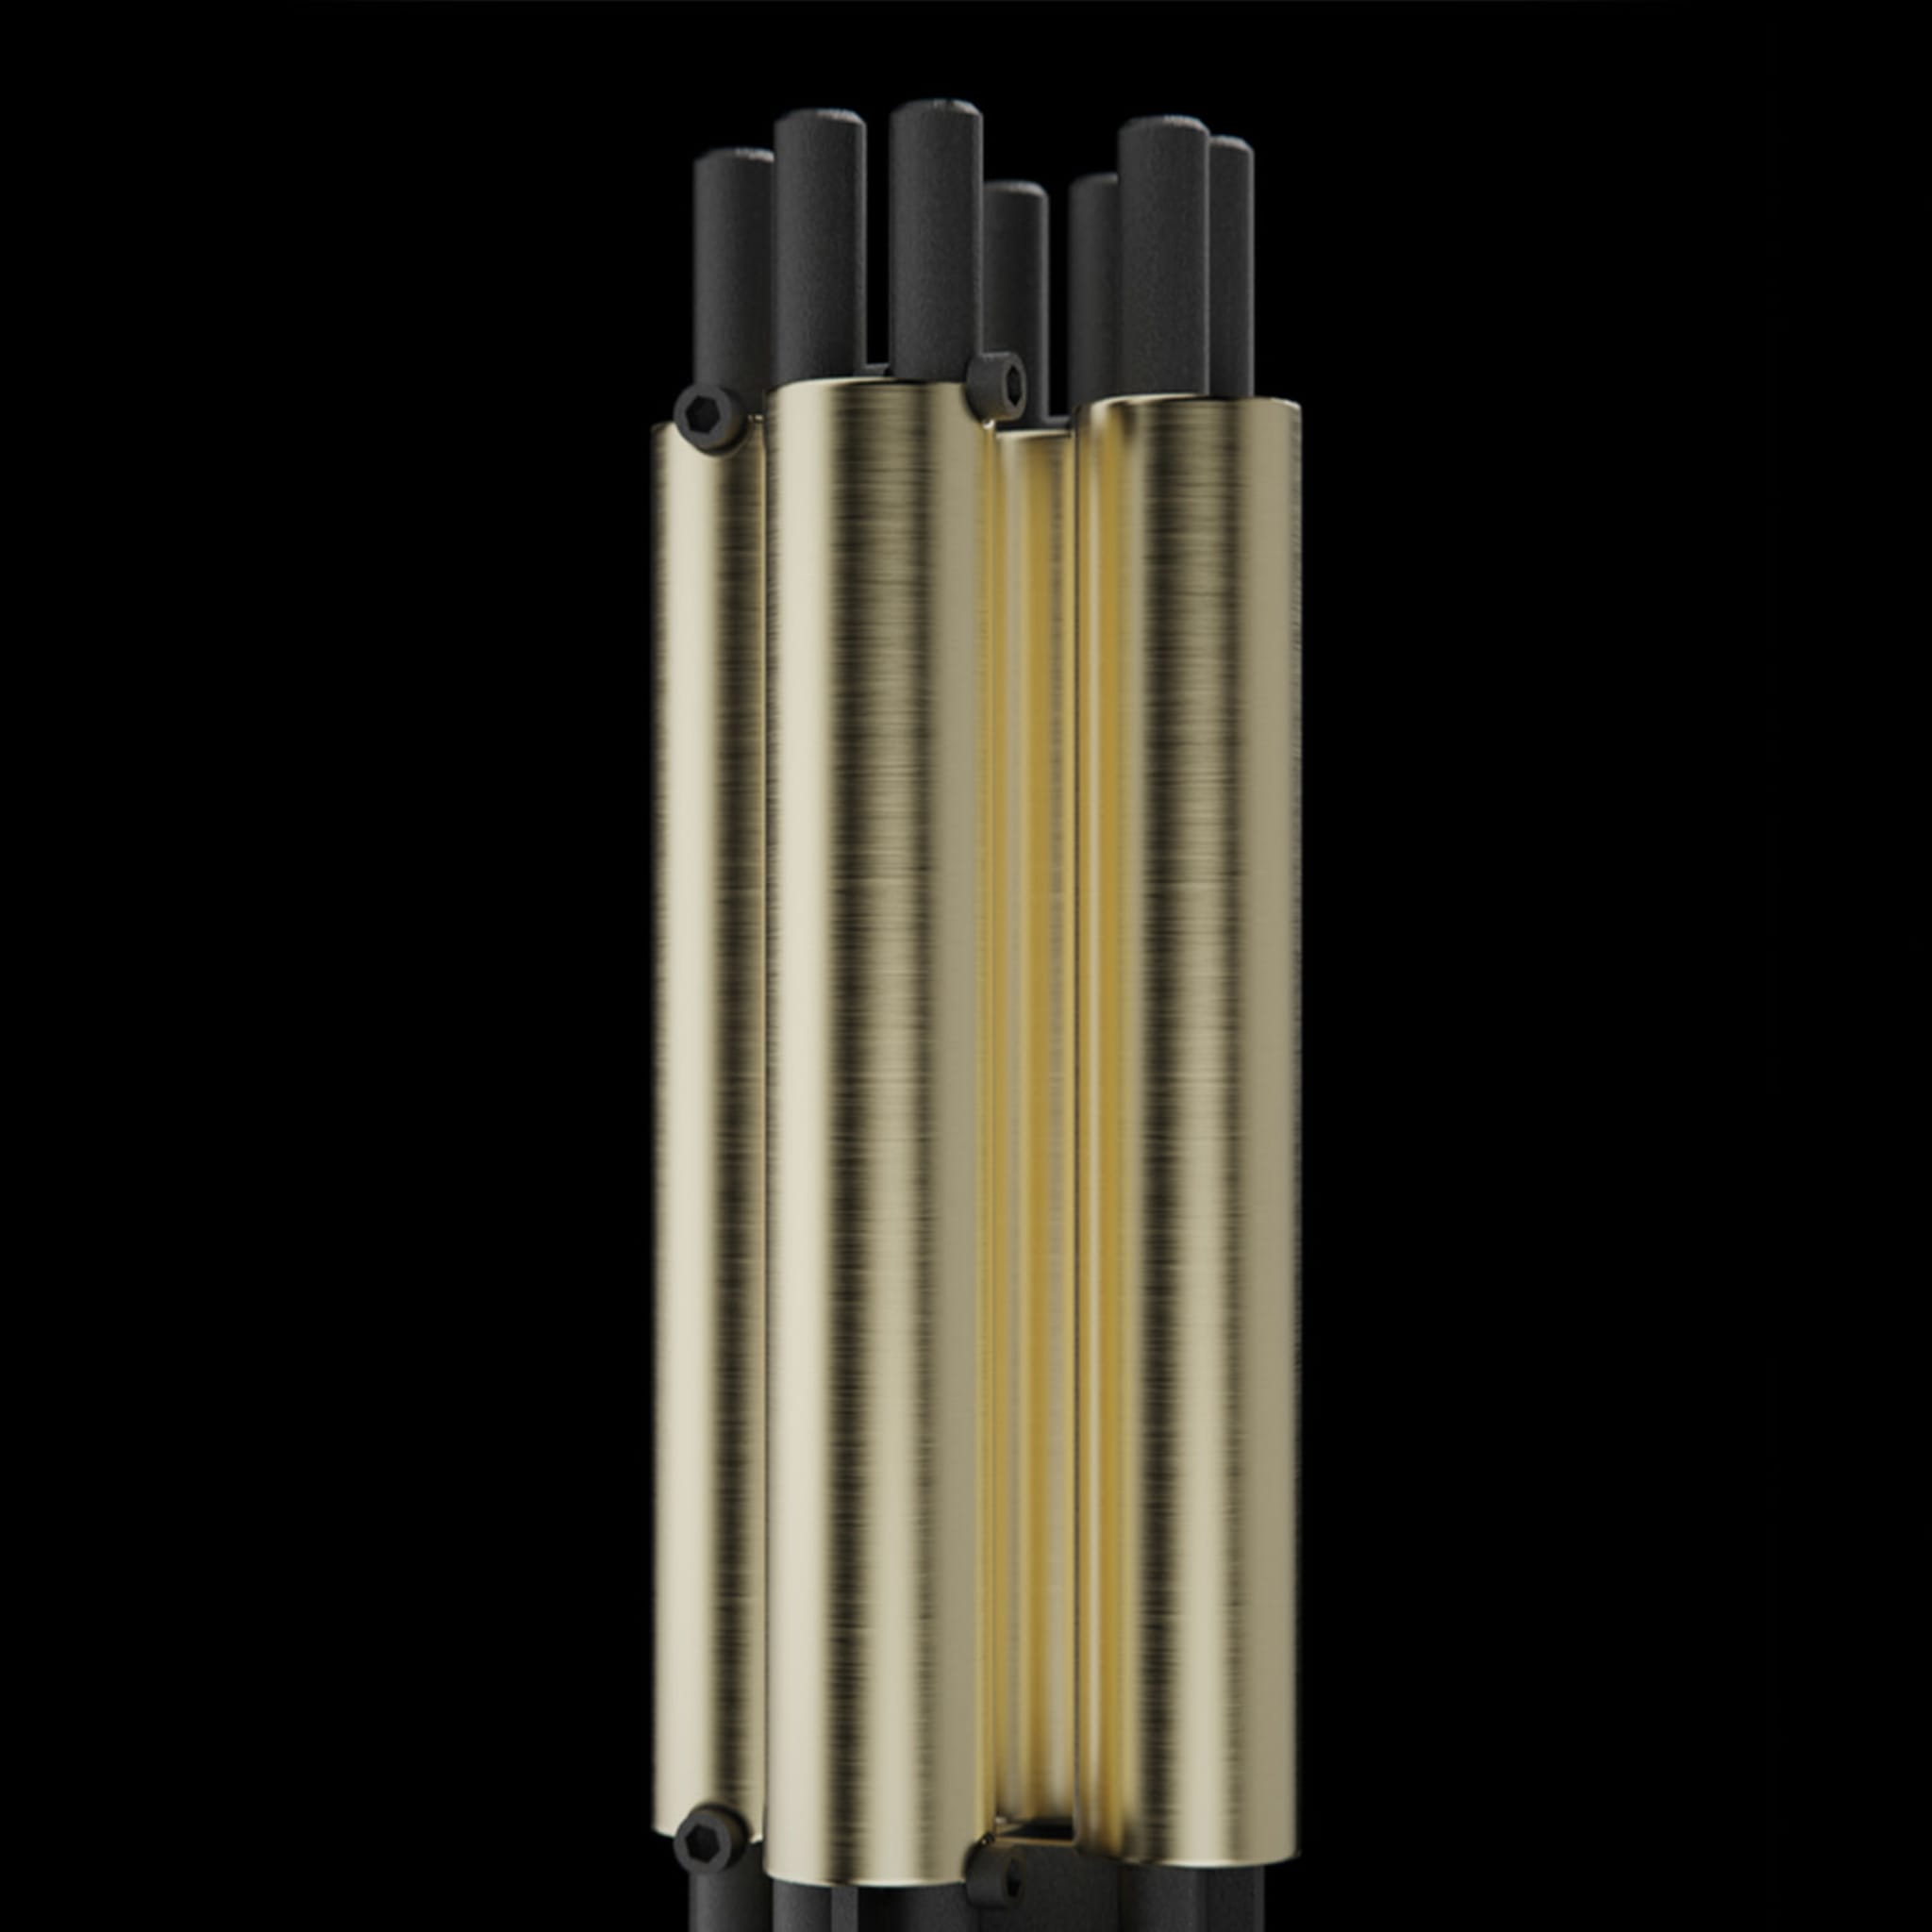 ED001 Black and Brass Fireplace Tools - Alternative view 2